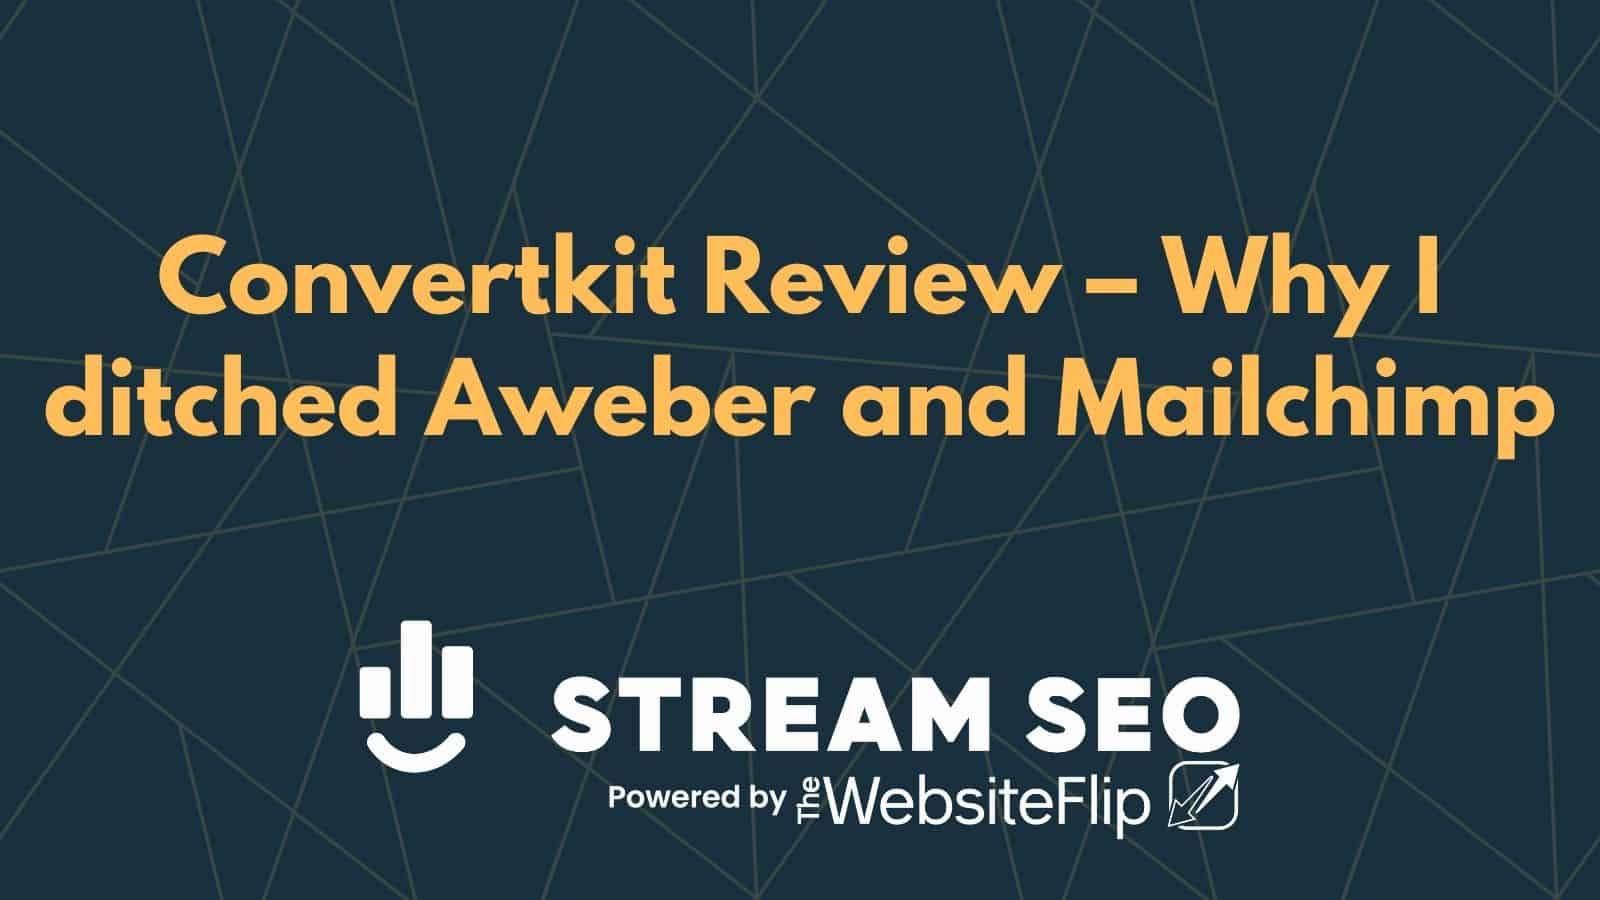 Convertkit Review – Why I ditched Aweber and Mailchimp